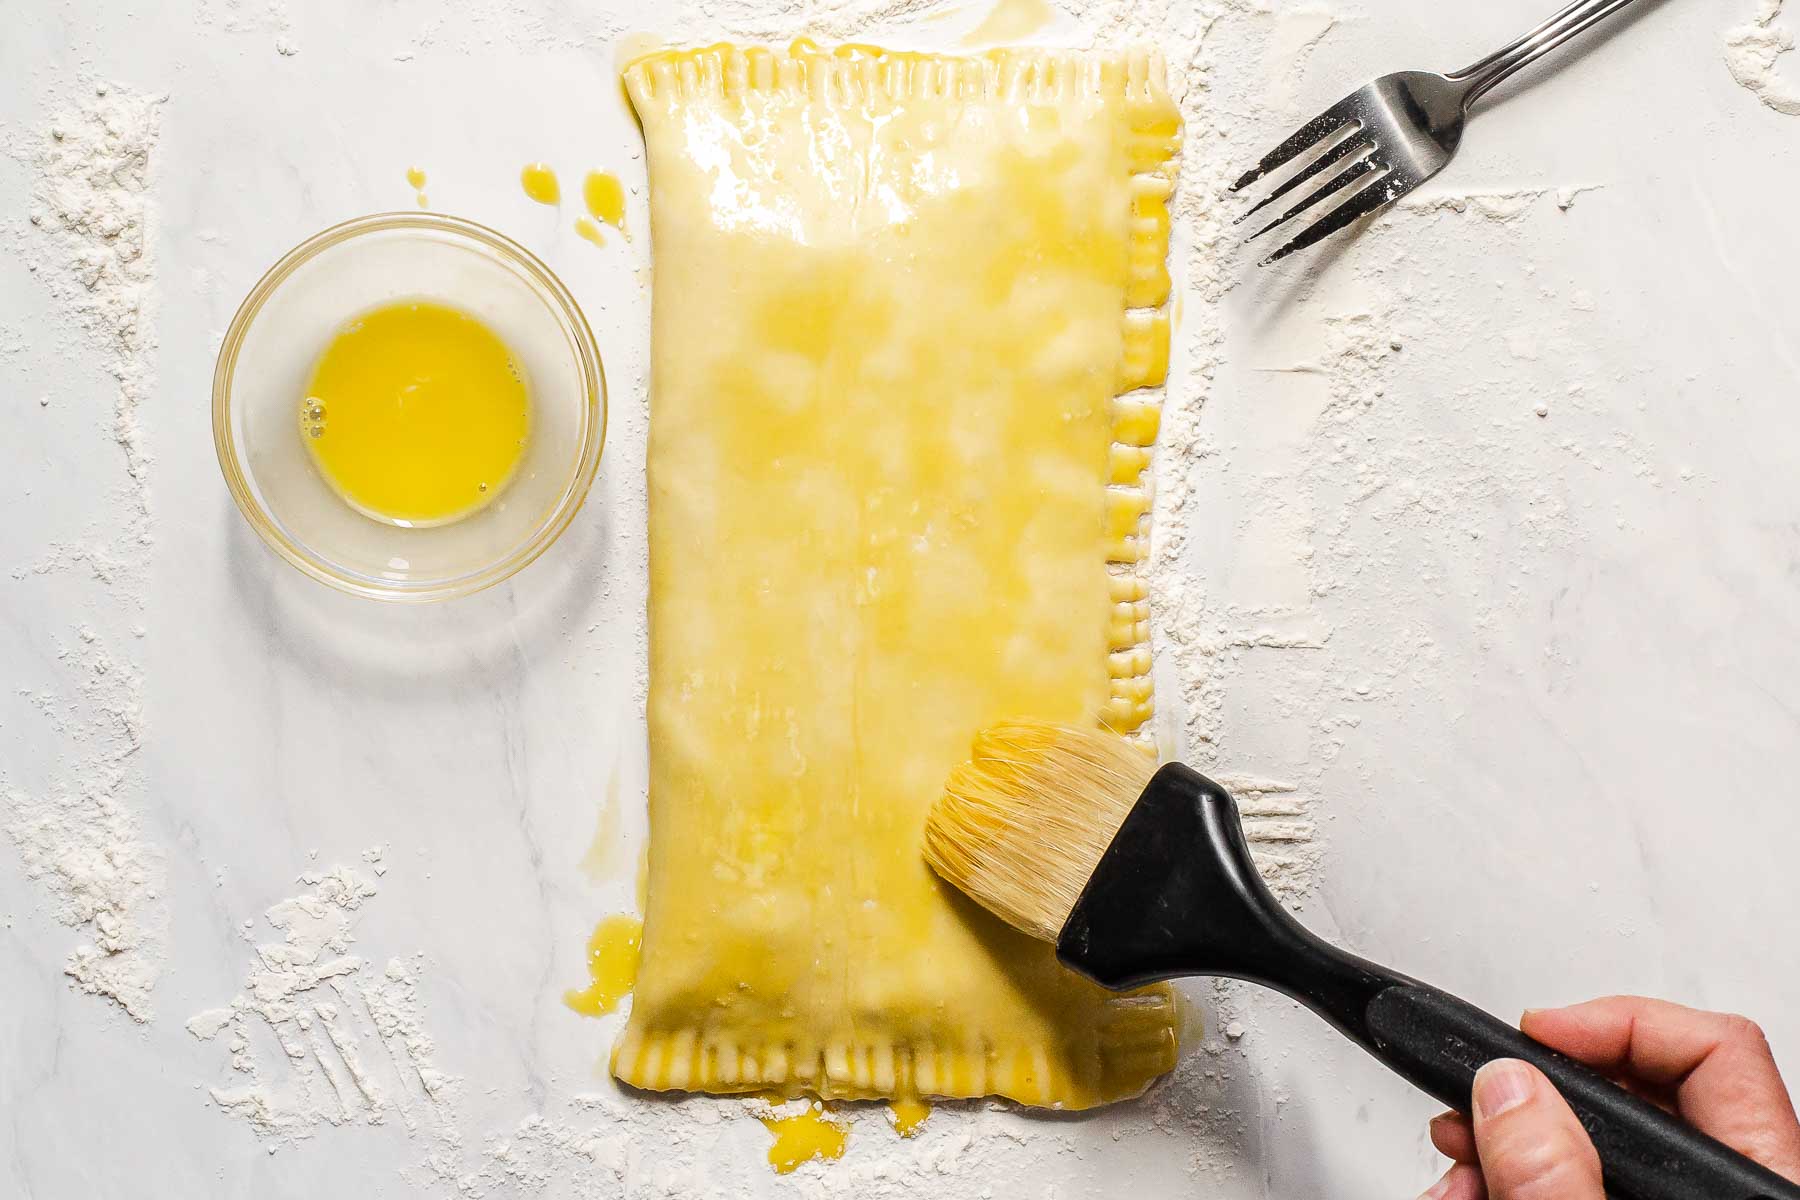 Puff pastry being brushed with beaten egg yolk.